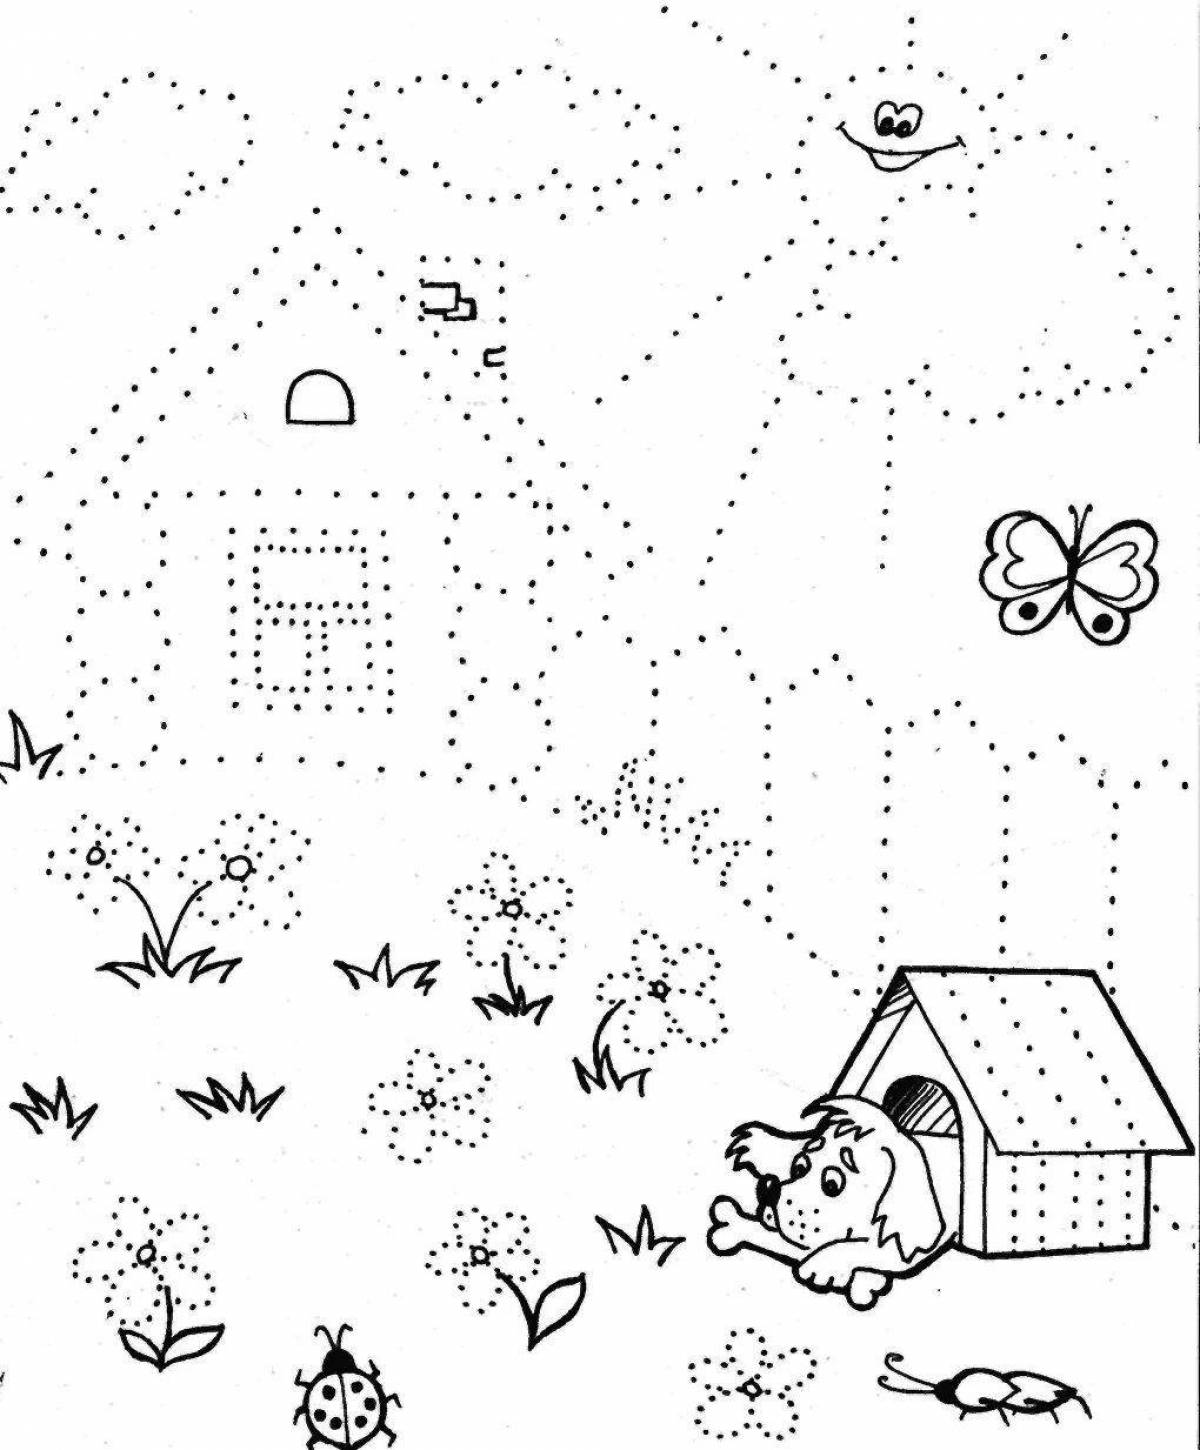 By dots for kids #1